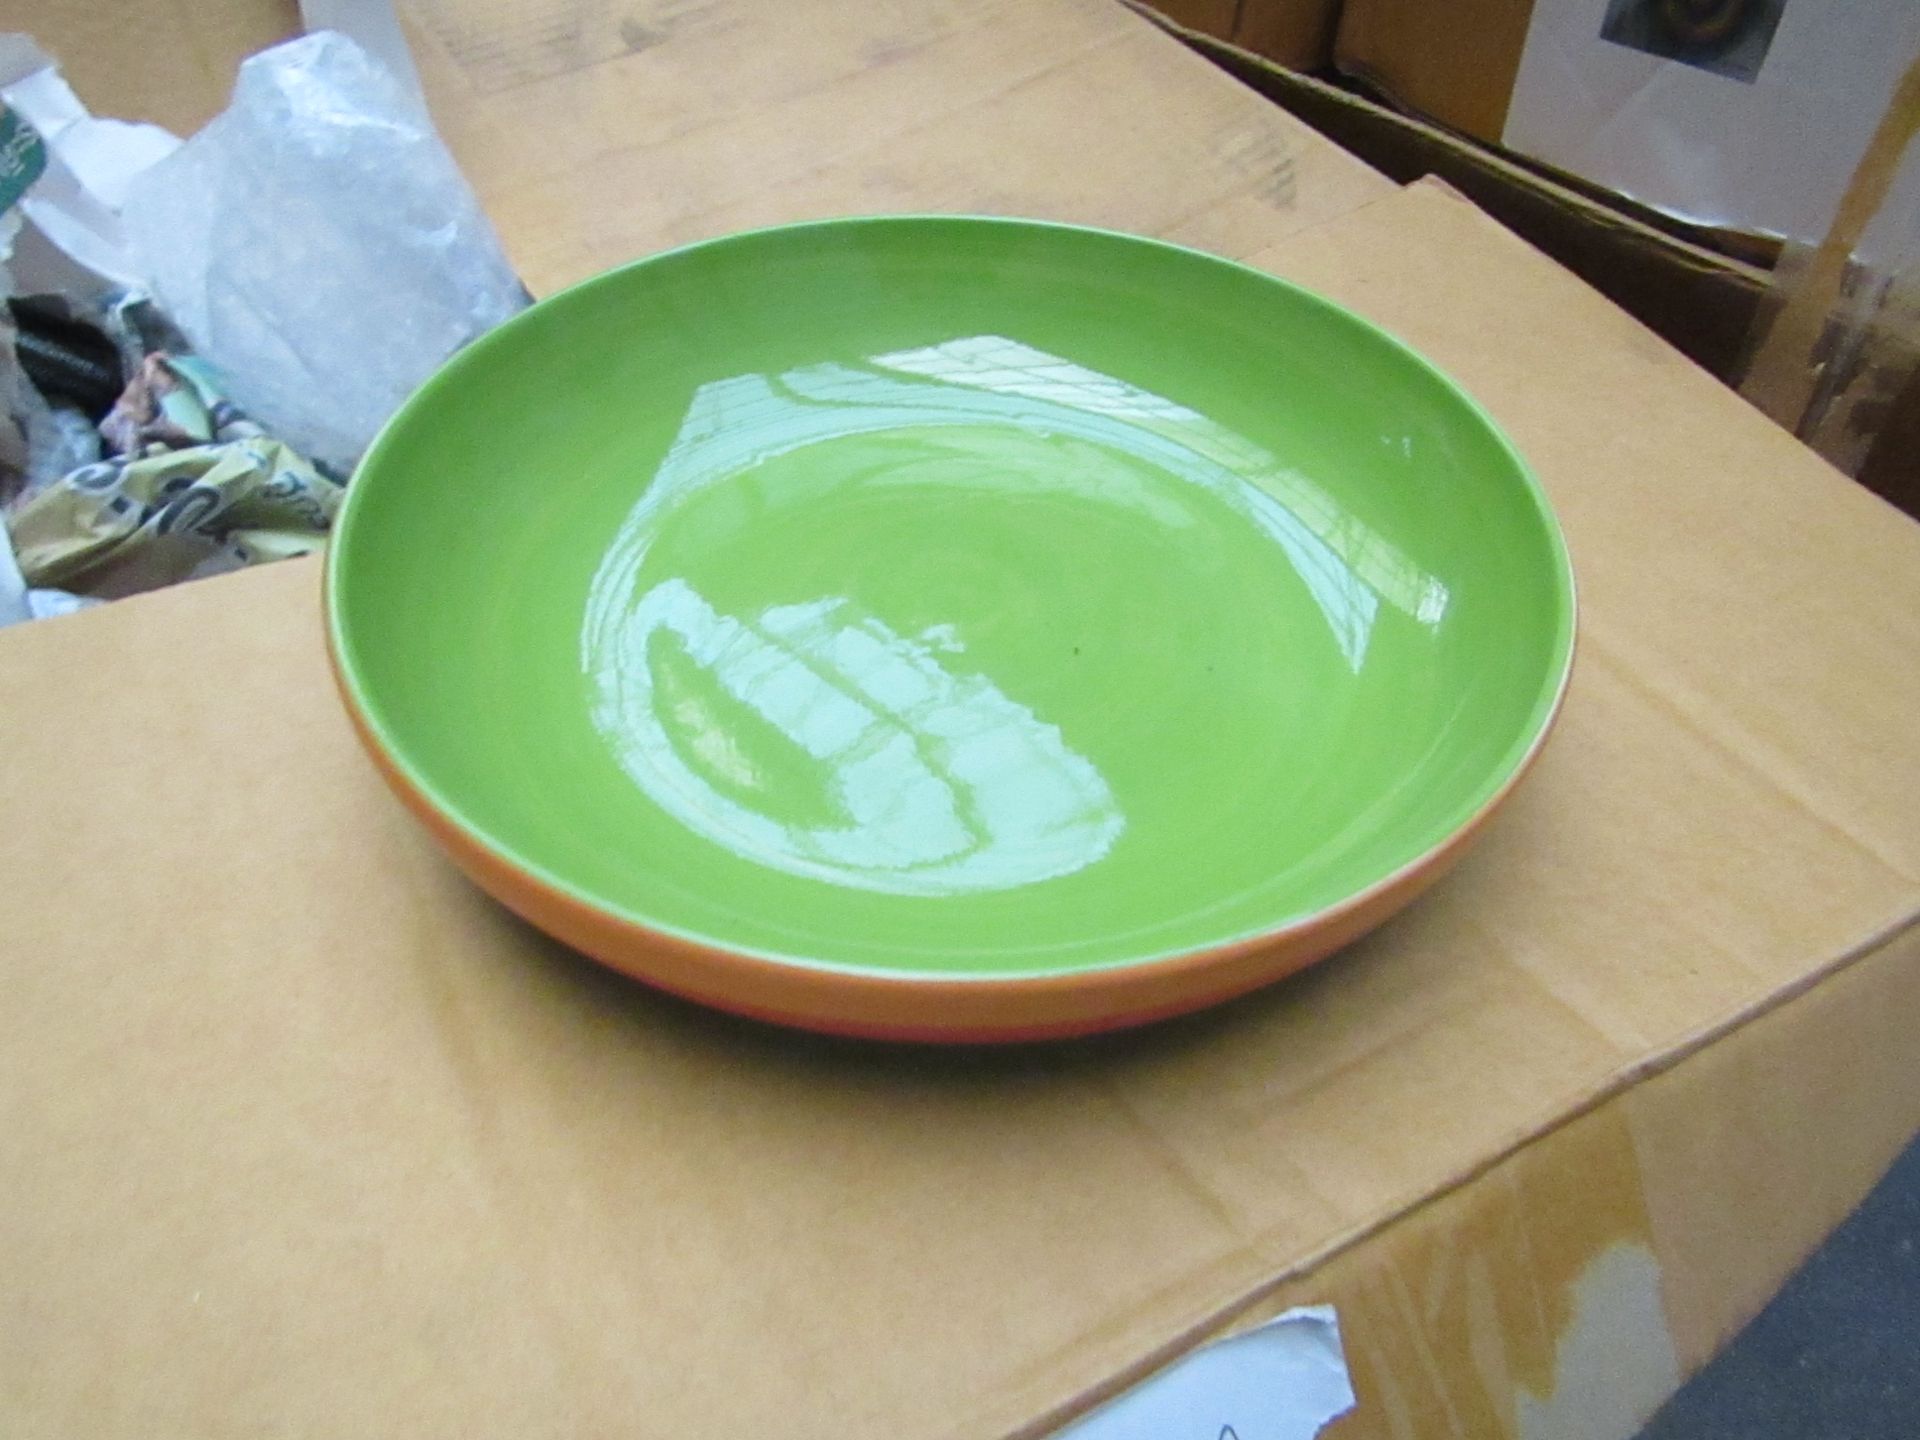 1x Set Rainbow Pasta Bowls - New & Packaged.